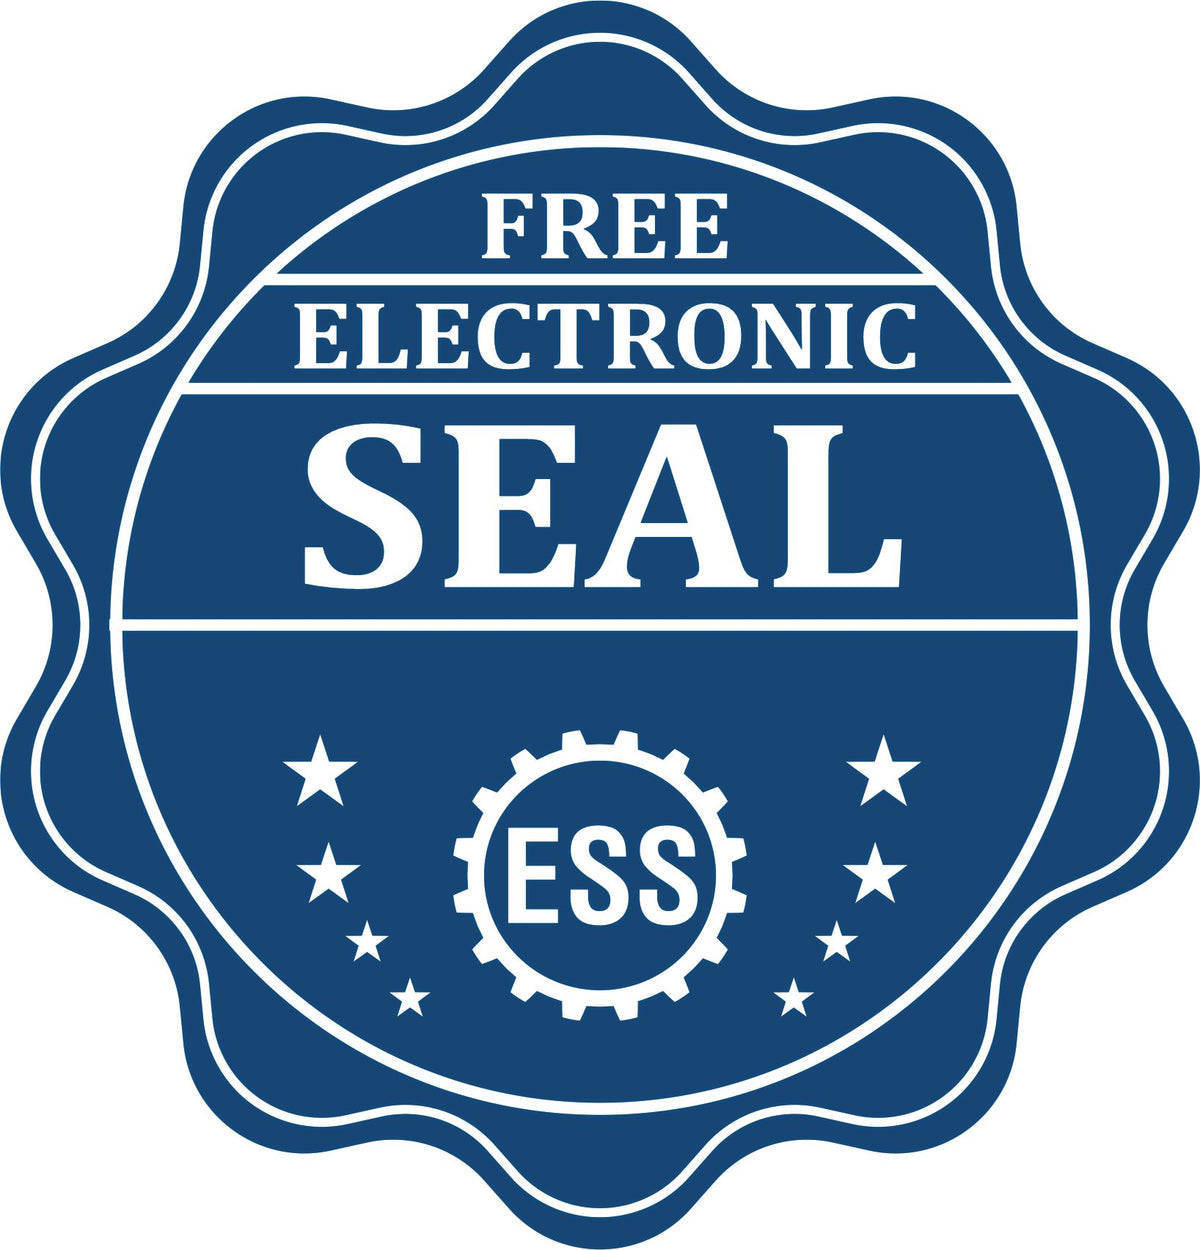 A badge showing a free electronic seal for the Gift Massachusetts Geologist Seal with stars and the ESS gear on the emblem.